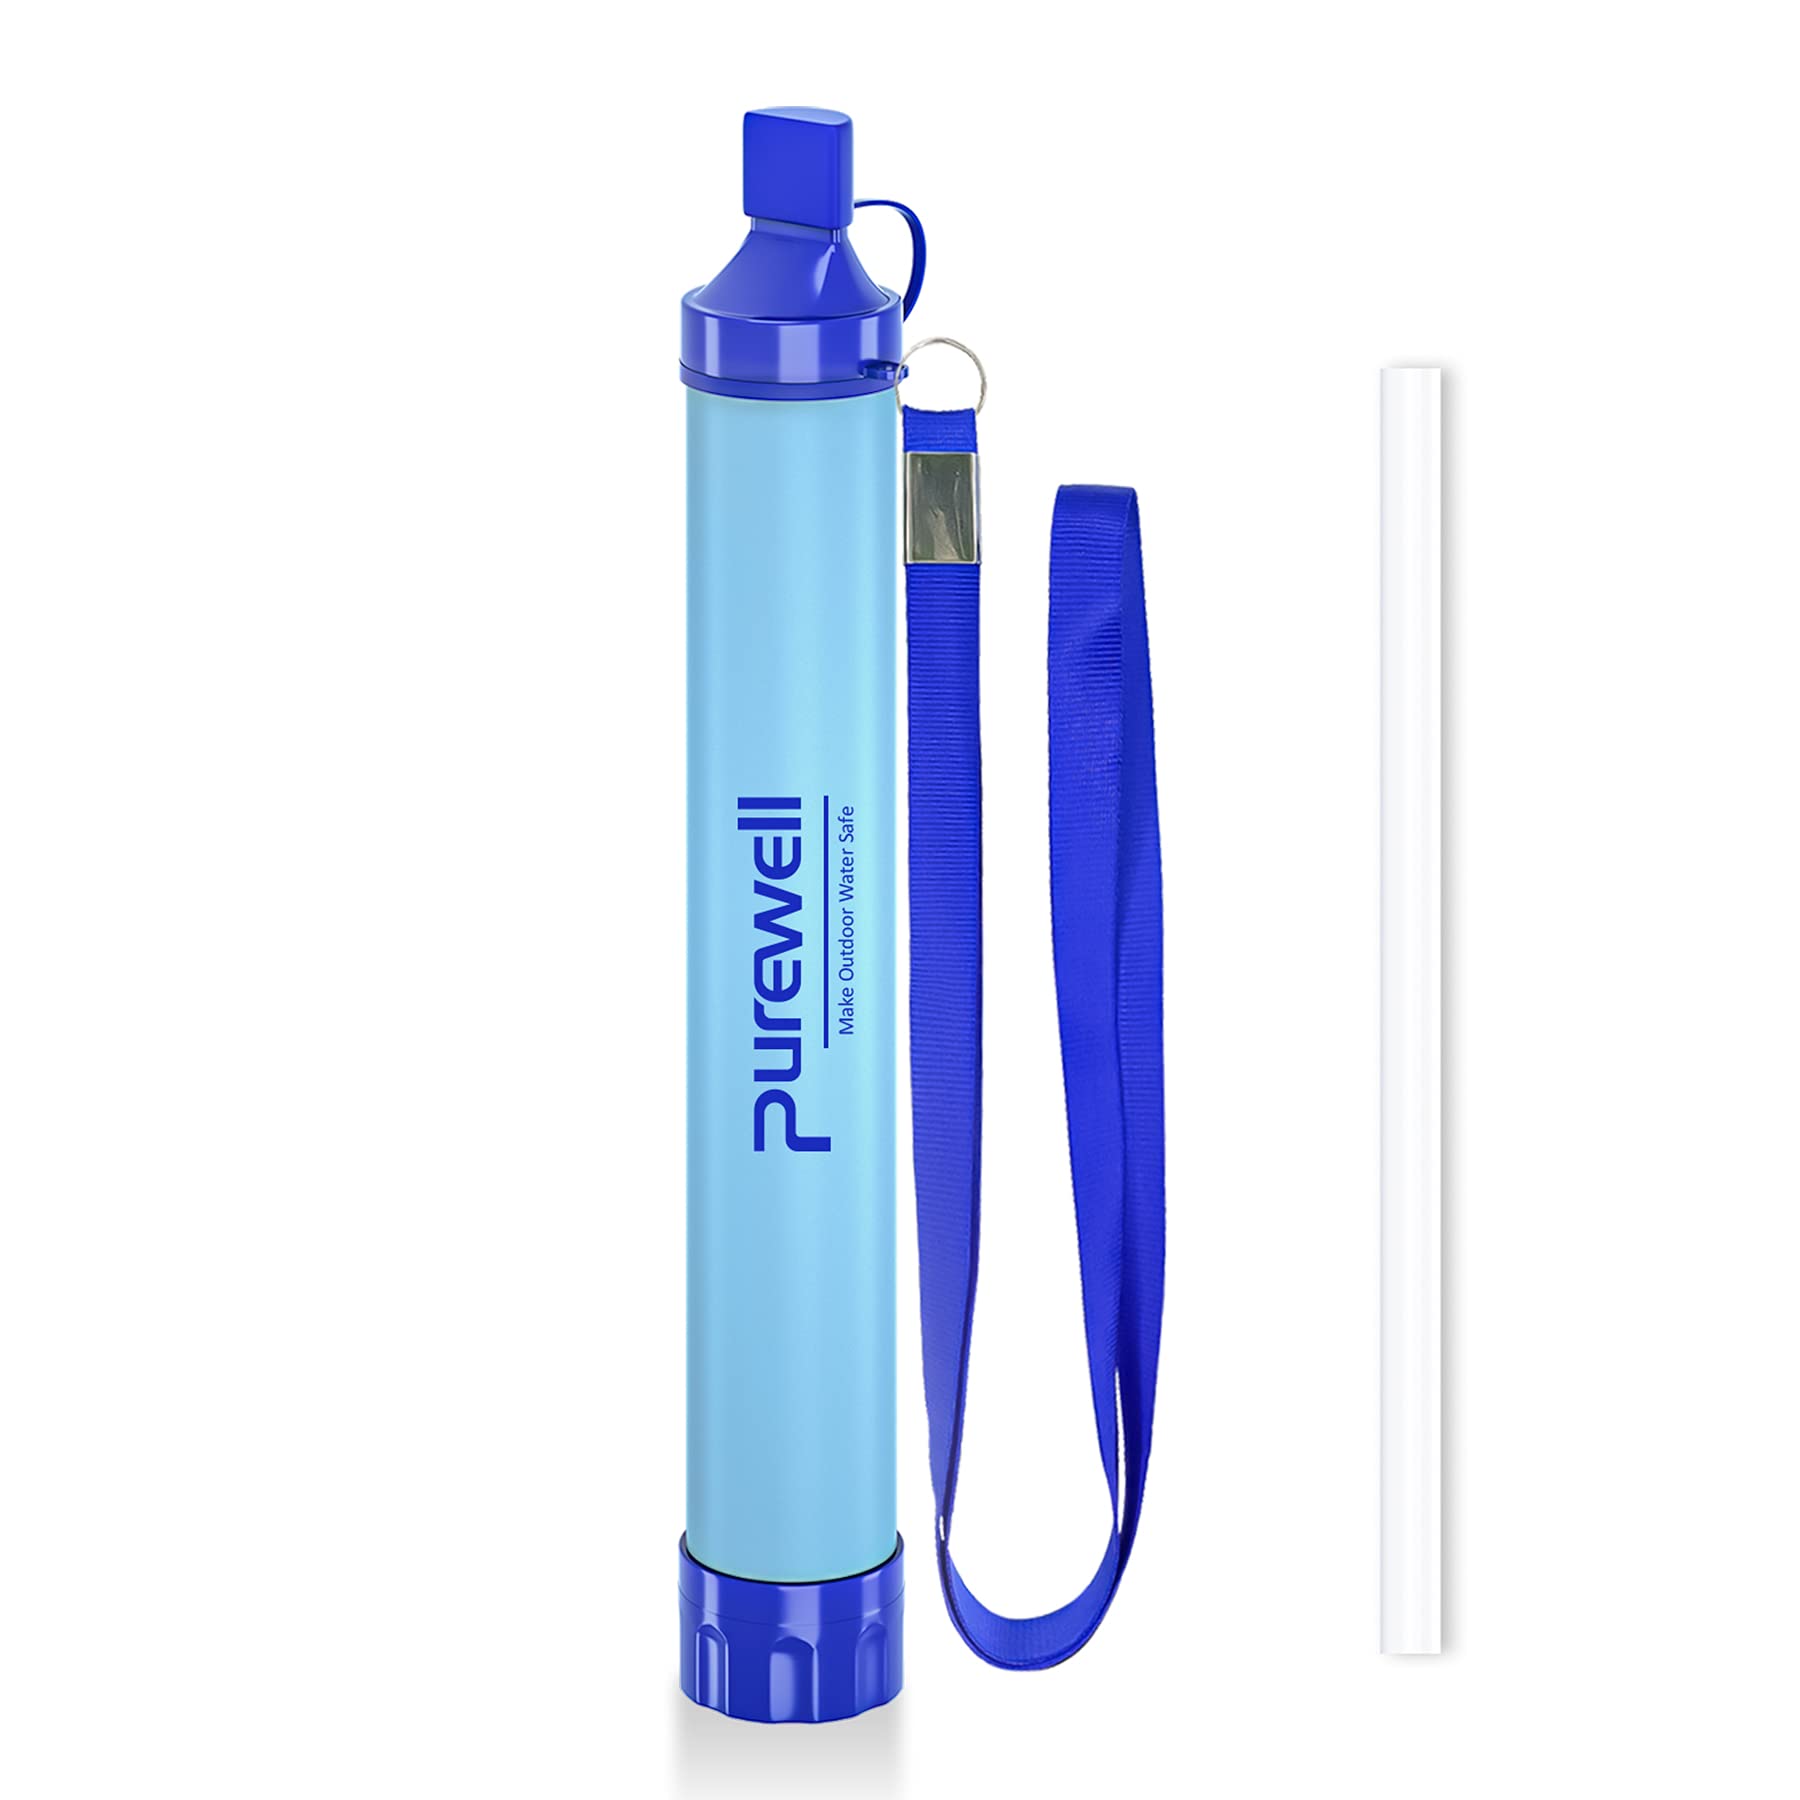  Purewell Collapsible Water Filter Canteens for Hiking, 1L  Water Bag/Bottle with Filter, Squeeze Water Through a Filter, Lightweight,  BPA Free, Leak Proof, Emergency Preparedness : Sports & Outdoors